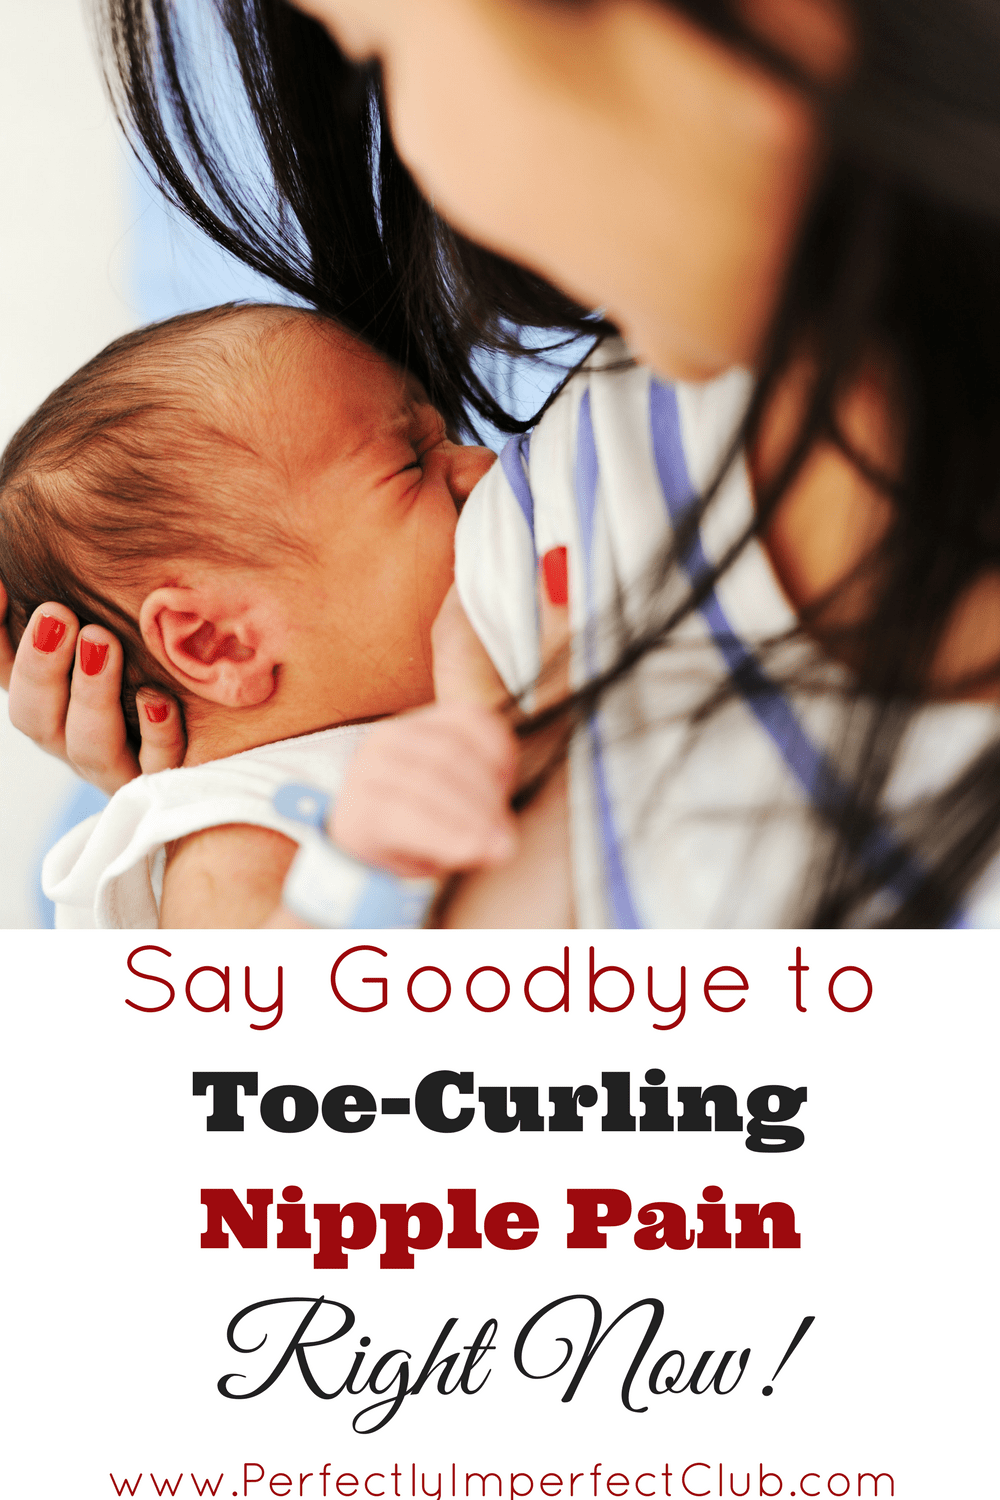  Don't suffer any longer, fix your nipple pain right now! No other cracked nipples home remedies work as well as this one!!! Sore Nipple tips from a Mom of 9.|Breastfeeding|Sore Nipples|Nipple Pain|